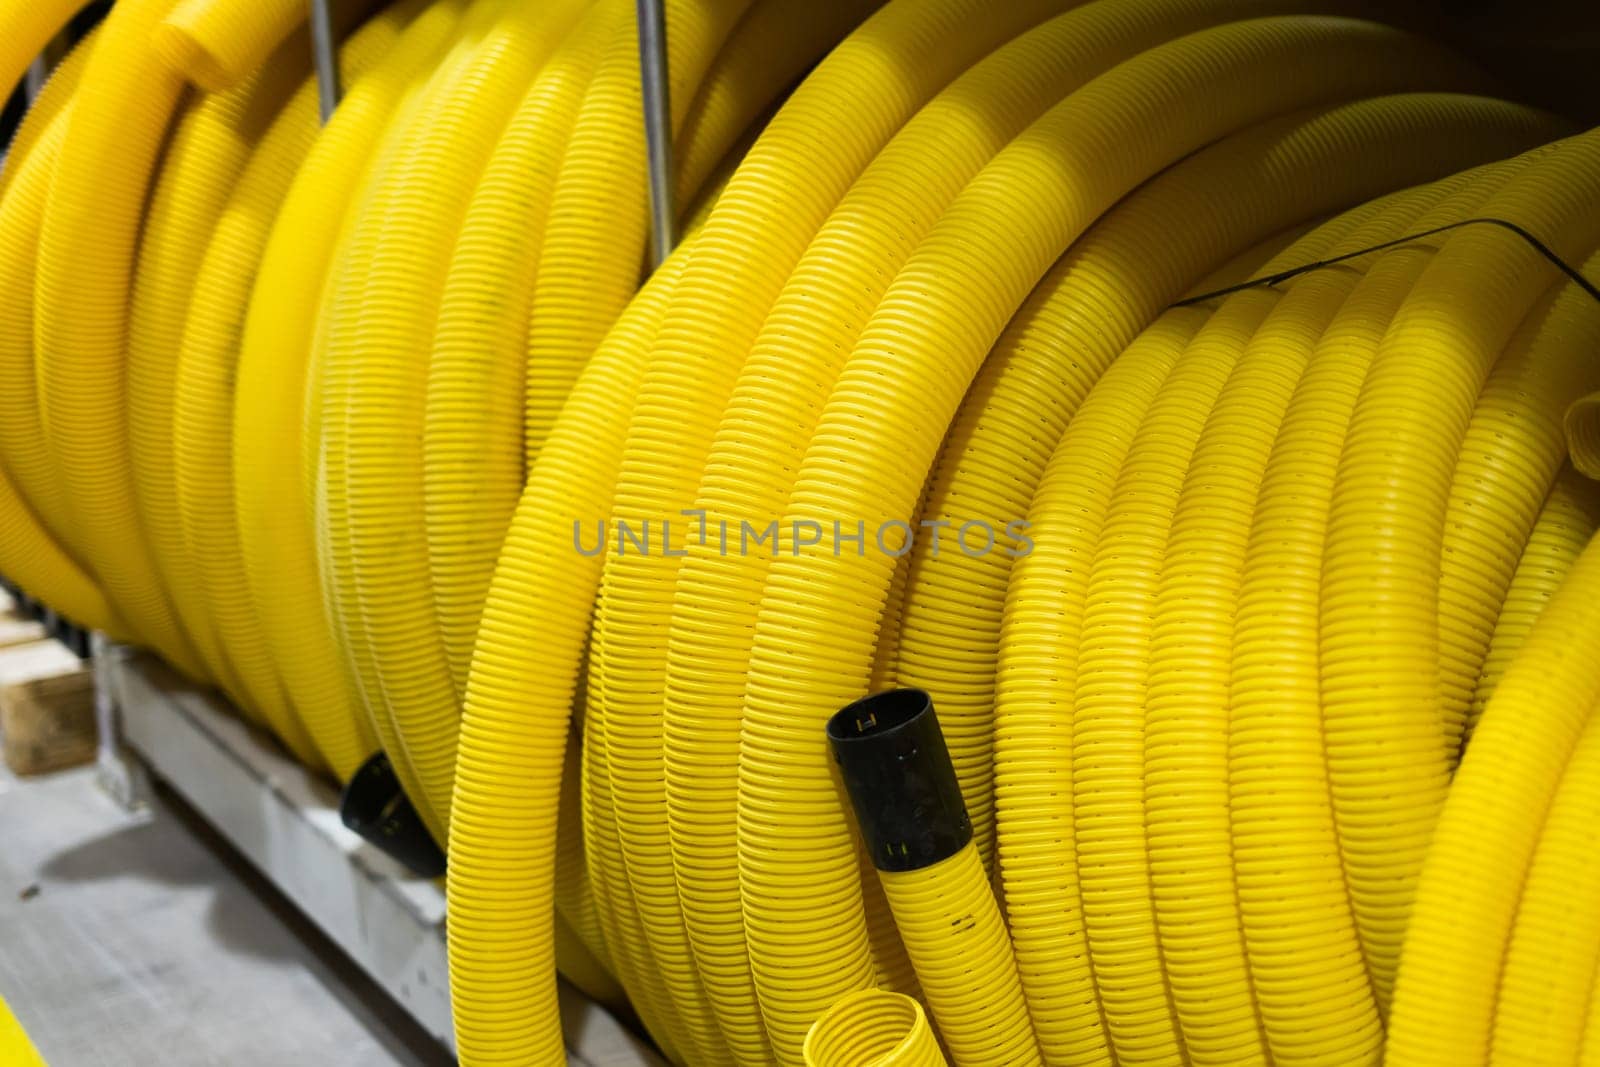 Large roll of a plastic corrugated pipe for insulating electrical wires